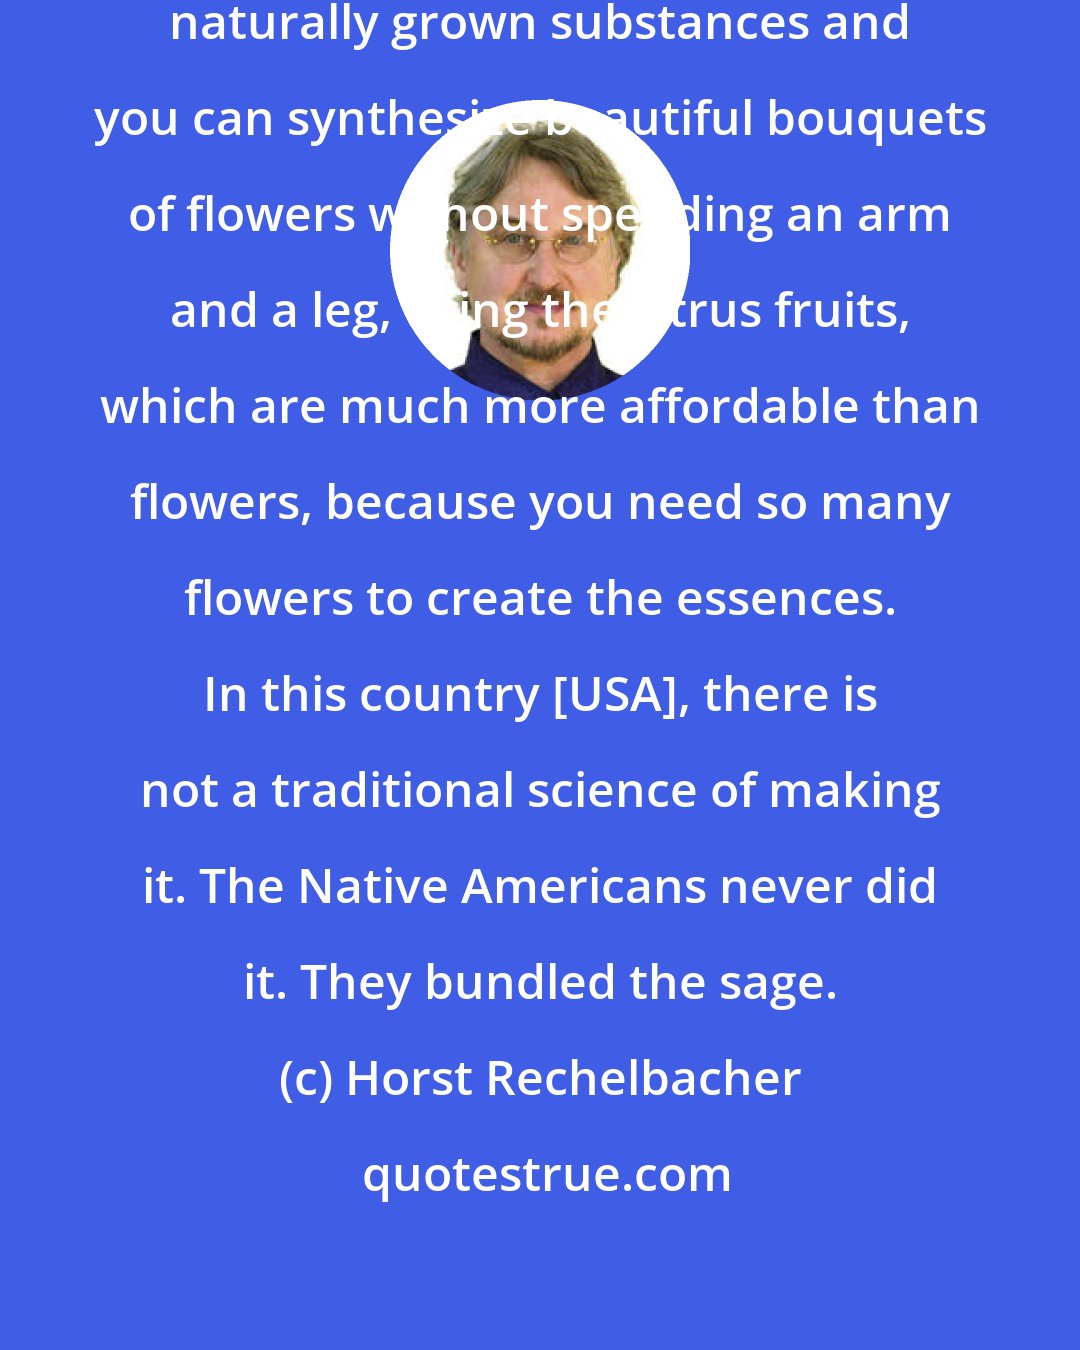 Horst Rechelbacher: You can create substances with other naturally grown substances and you can synthesize beautiful bouquets of flowers without spending an arm and a leg, using the citrus fruits, which are much more affordable than flowers, because you need so many flowers to create the essences. In this country [USA], there is not a traditional science of making it. The Native Americans never did it. They bundled the sage.